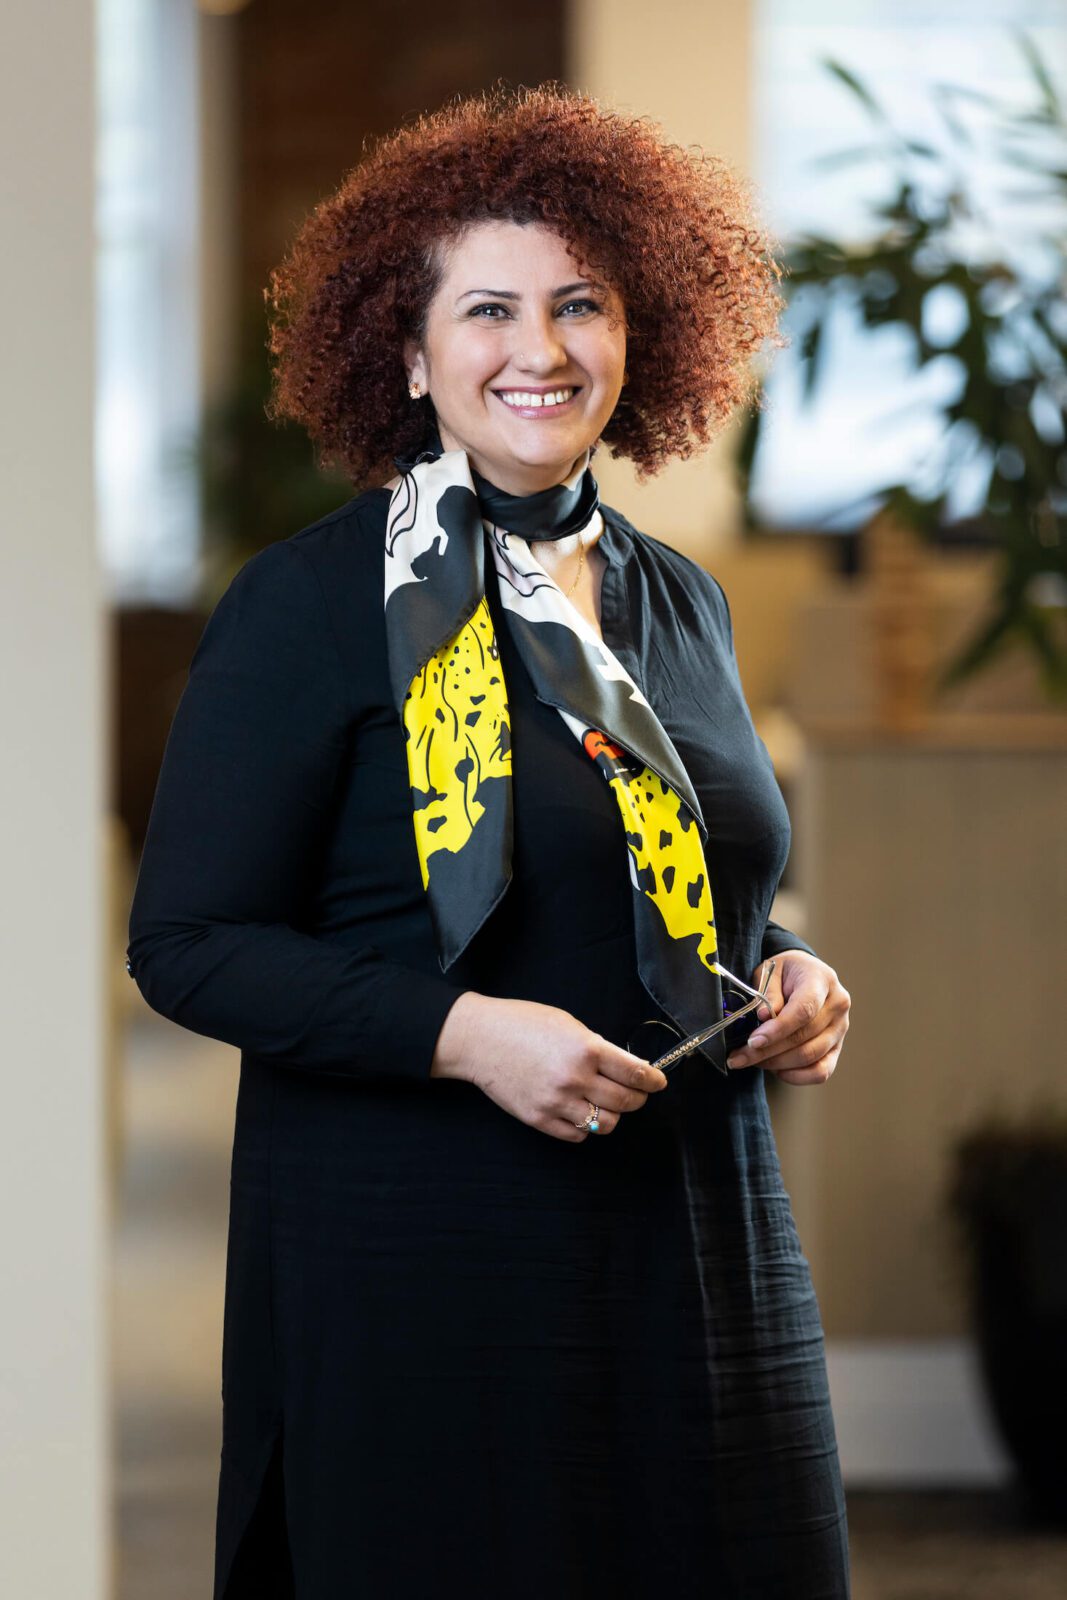 Woman in black dress and black, yellow and white print scarf with reddish brown afro stands holding glasses, smiles broadly to camera